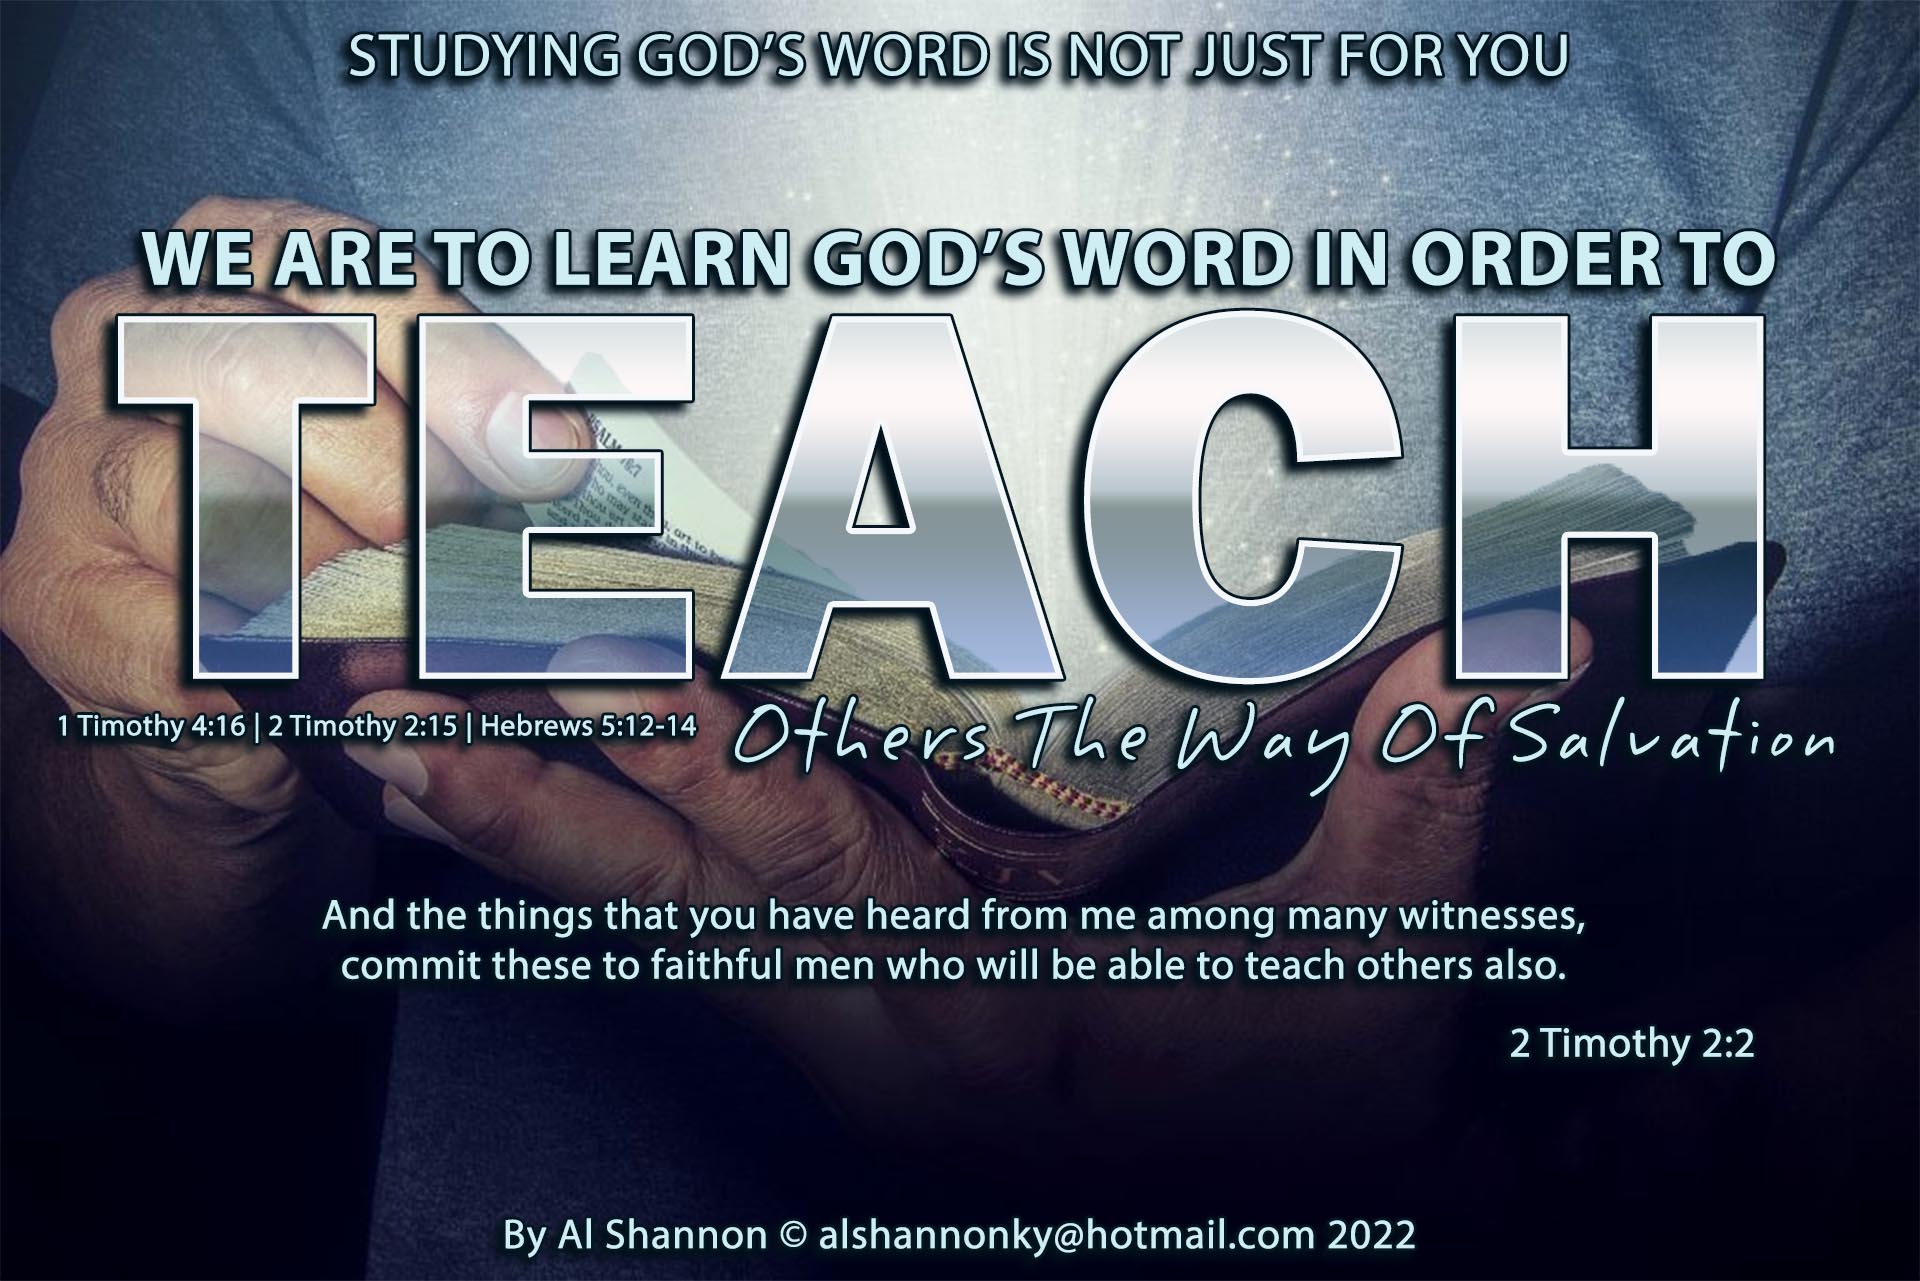 We Are To Learn God’s Word in Order To Teach